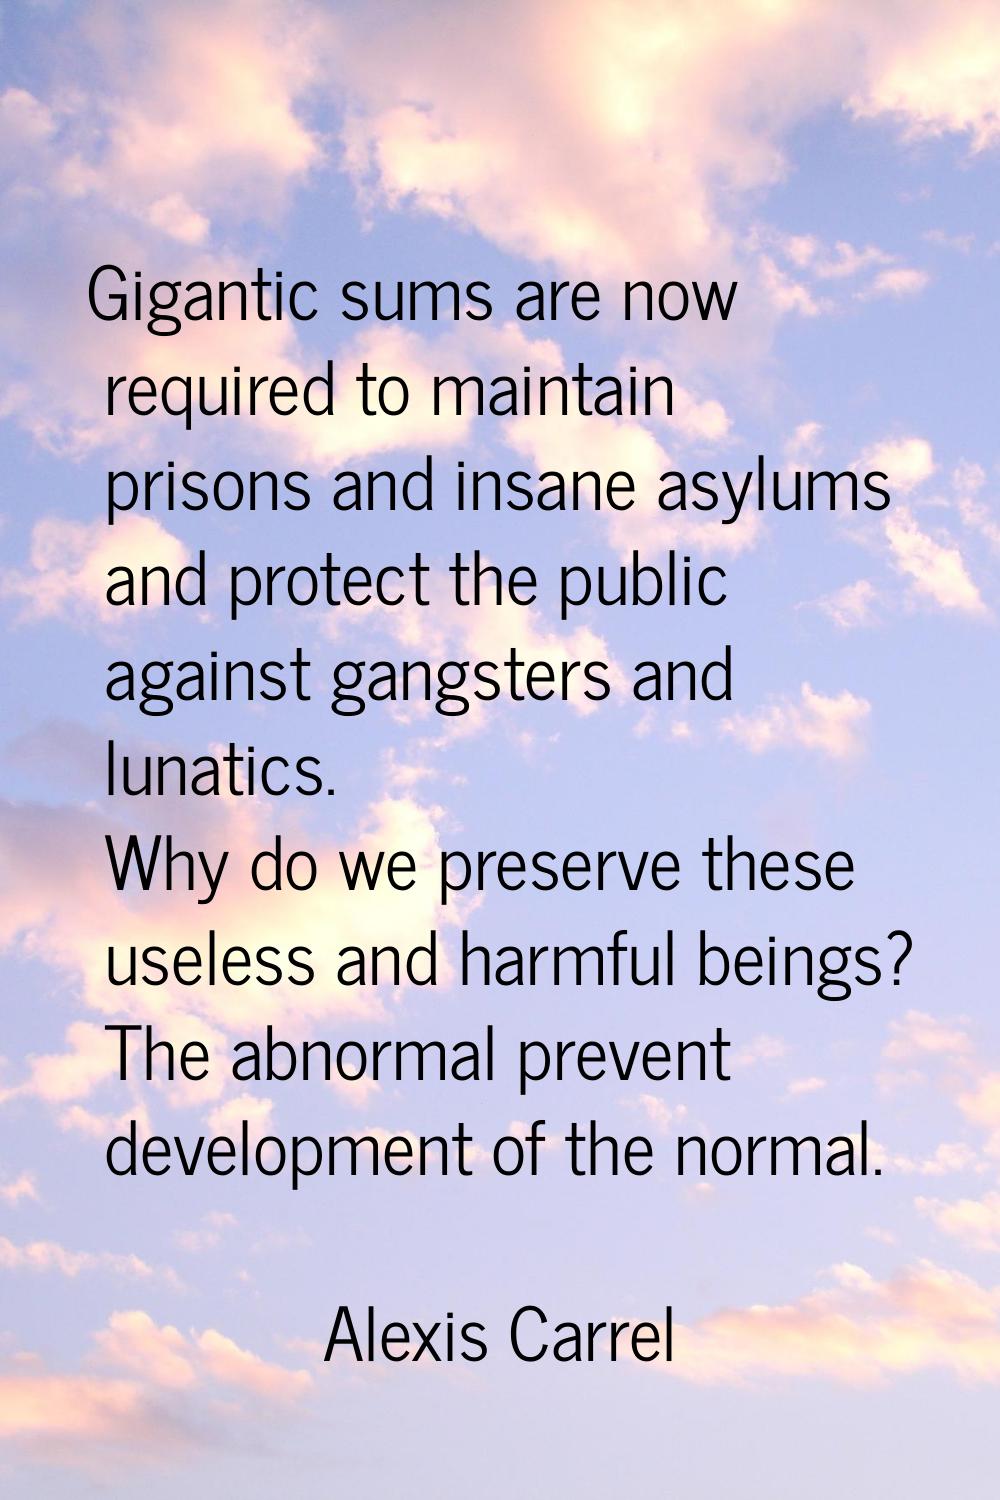 Gigantic sums are now required to maintain prisons and insane asylums and protect the public agains